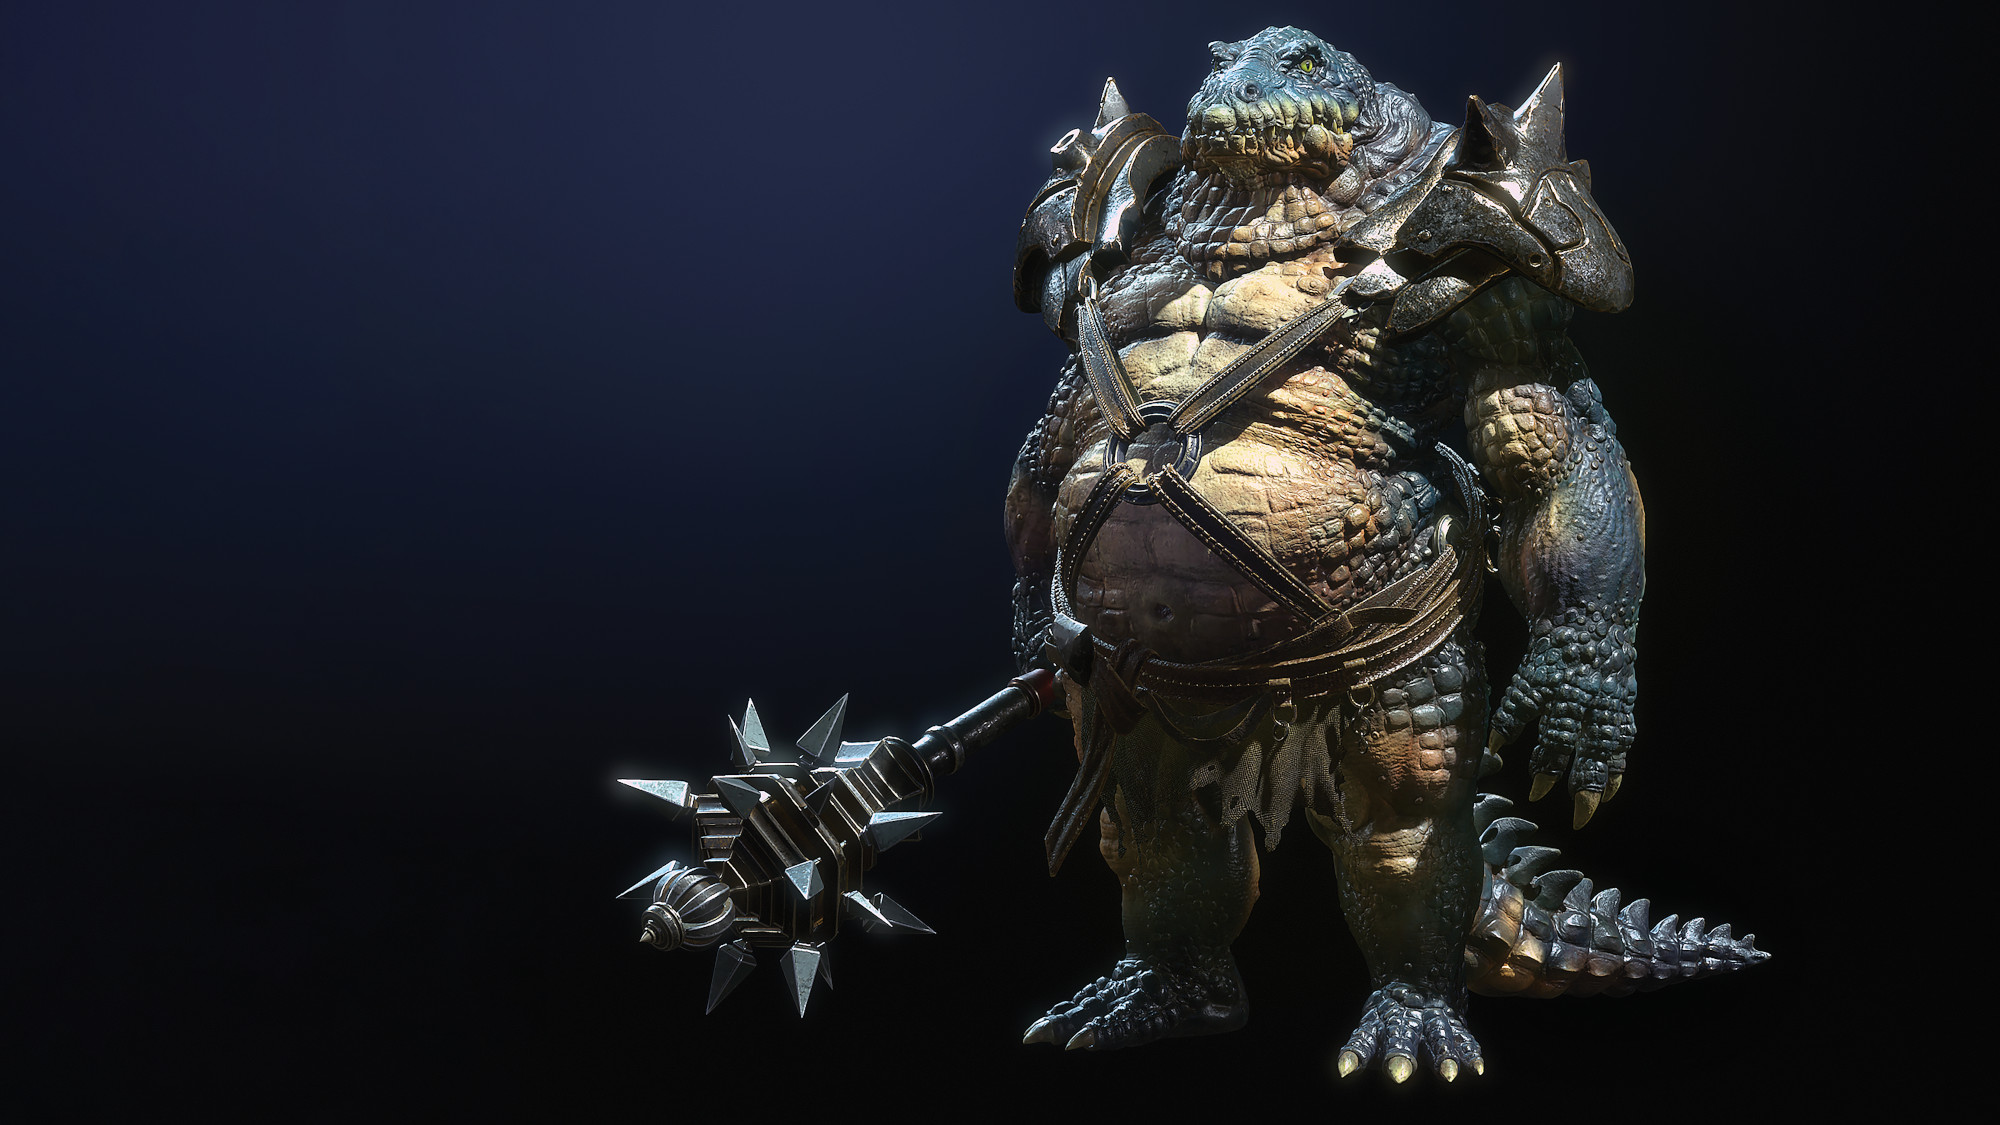 How to sculpt a reptilian creature using ZBrush, Maya and Substance 3D